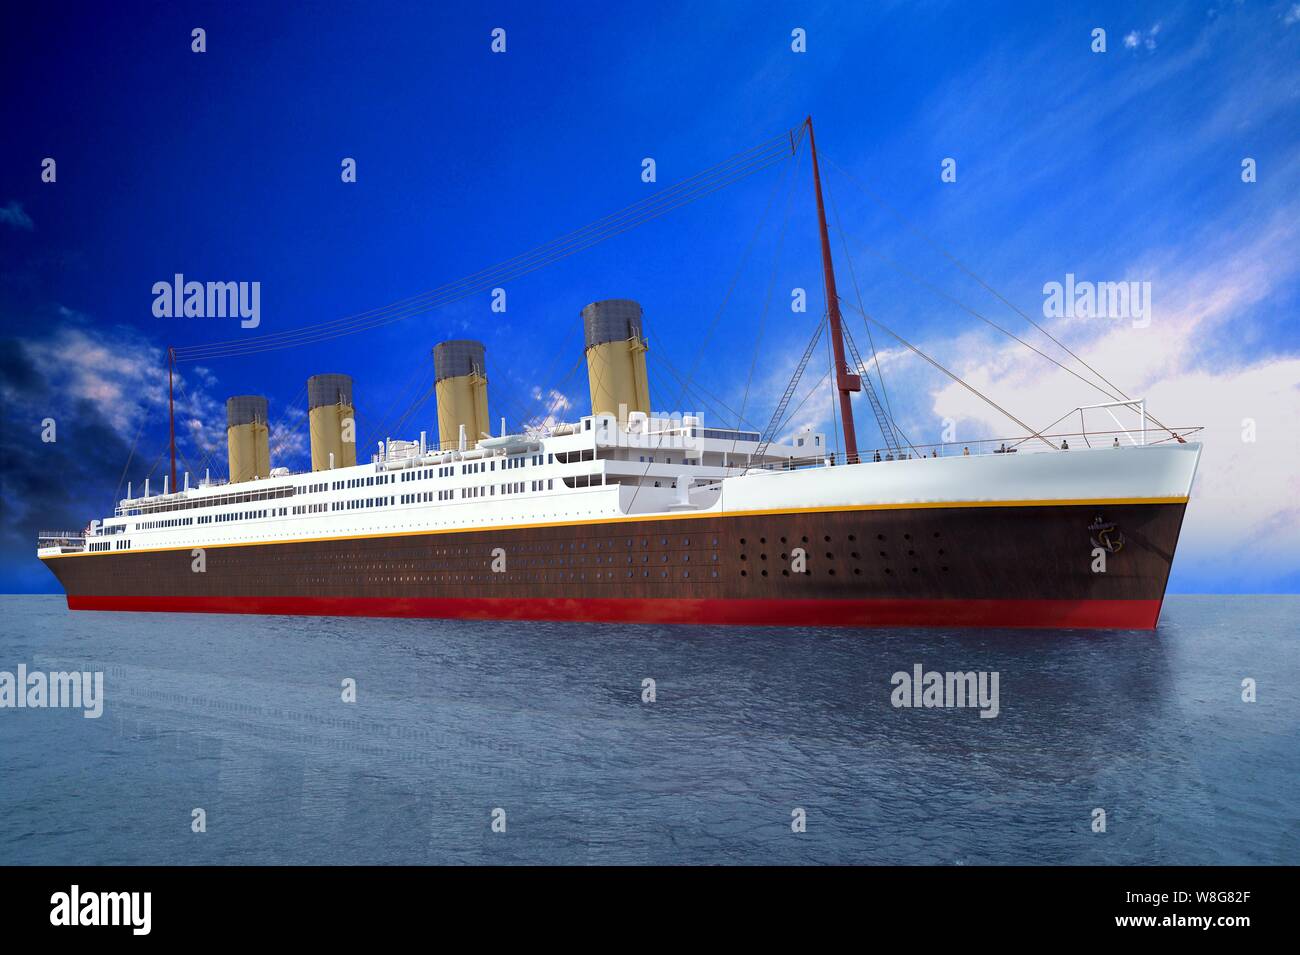 This Artist rendition shows a full-scale replica of the Titanic ocean ...